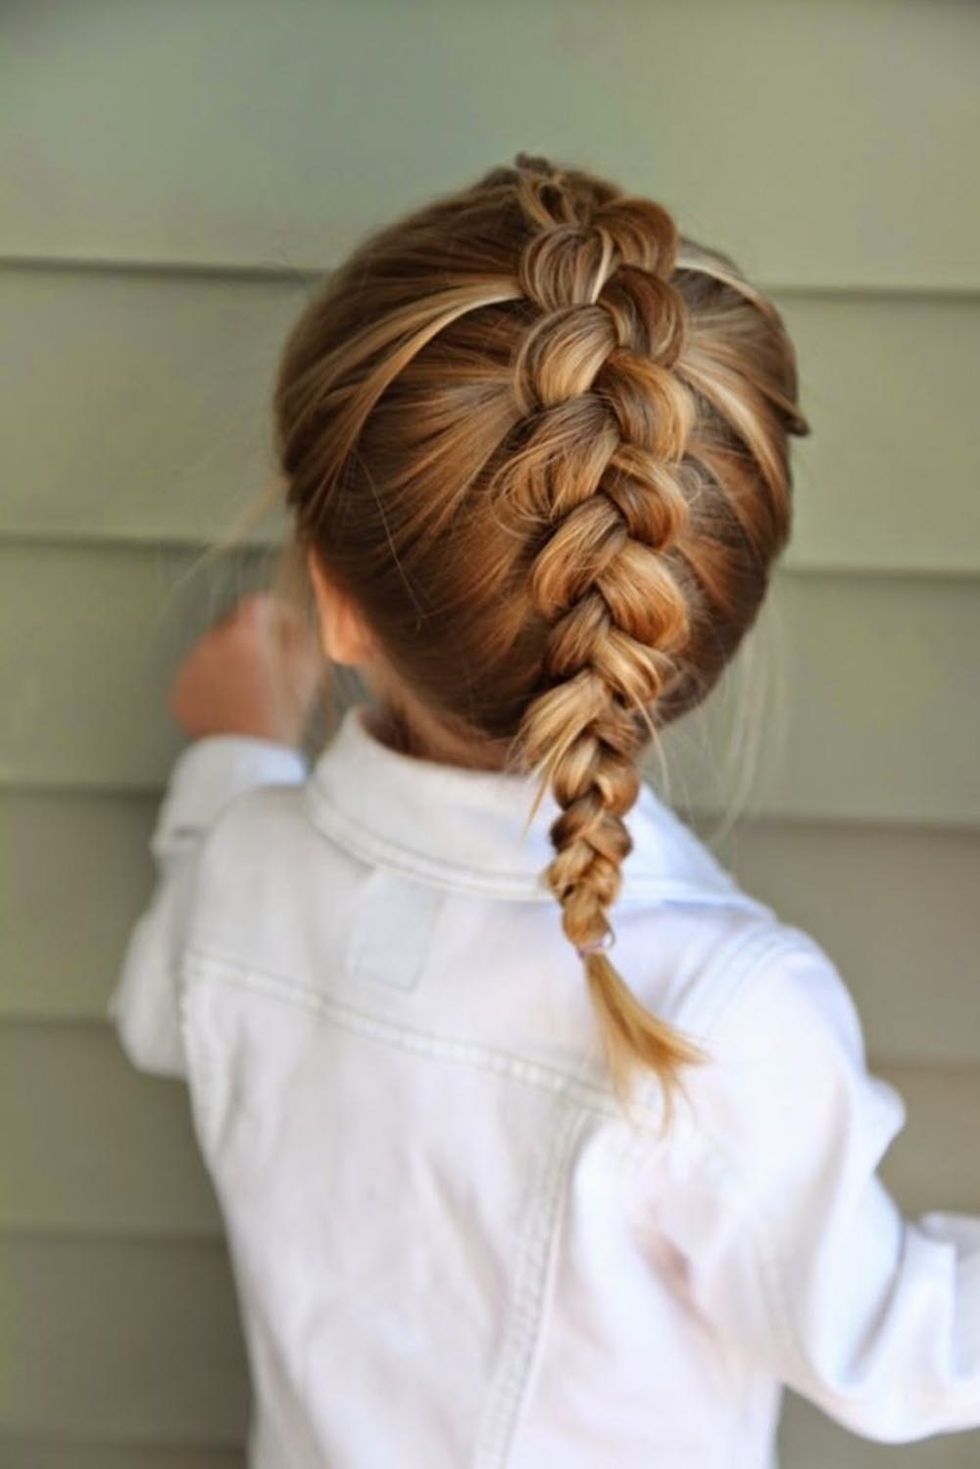 11 Easy Hairstyles To Get Your Kids Out The Door Fast Brit